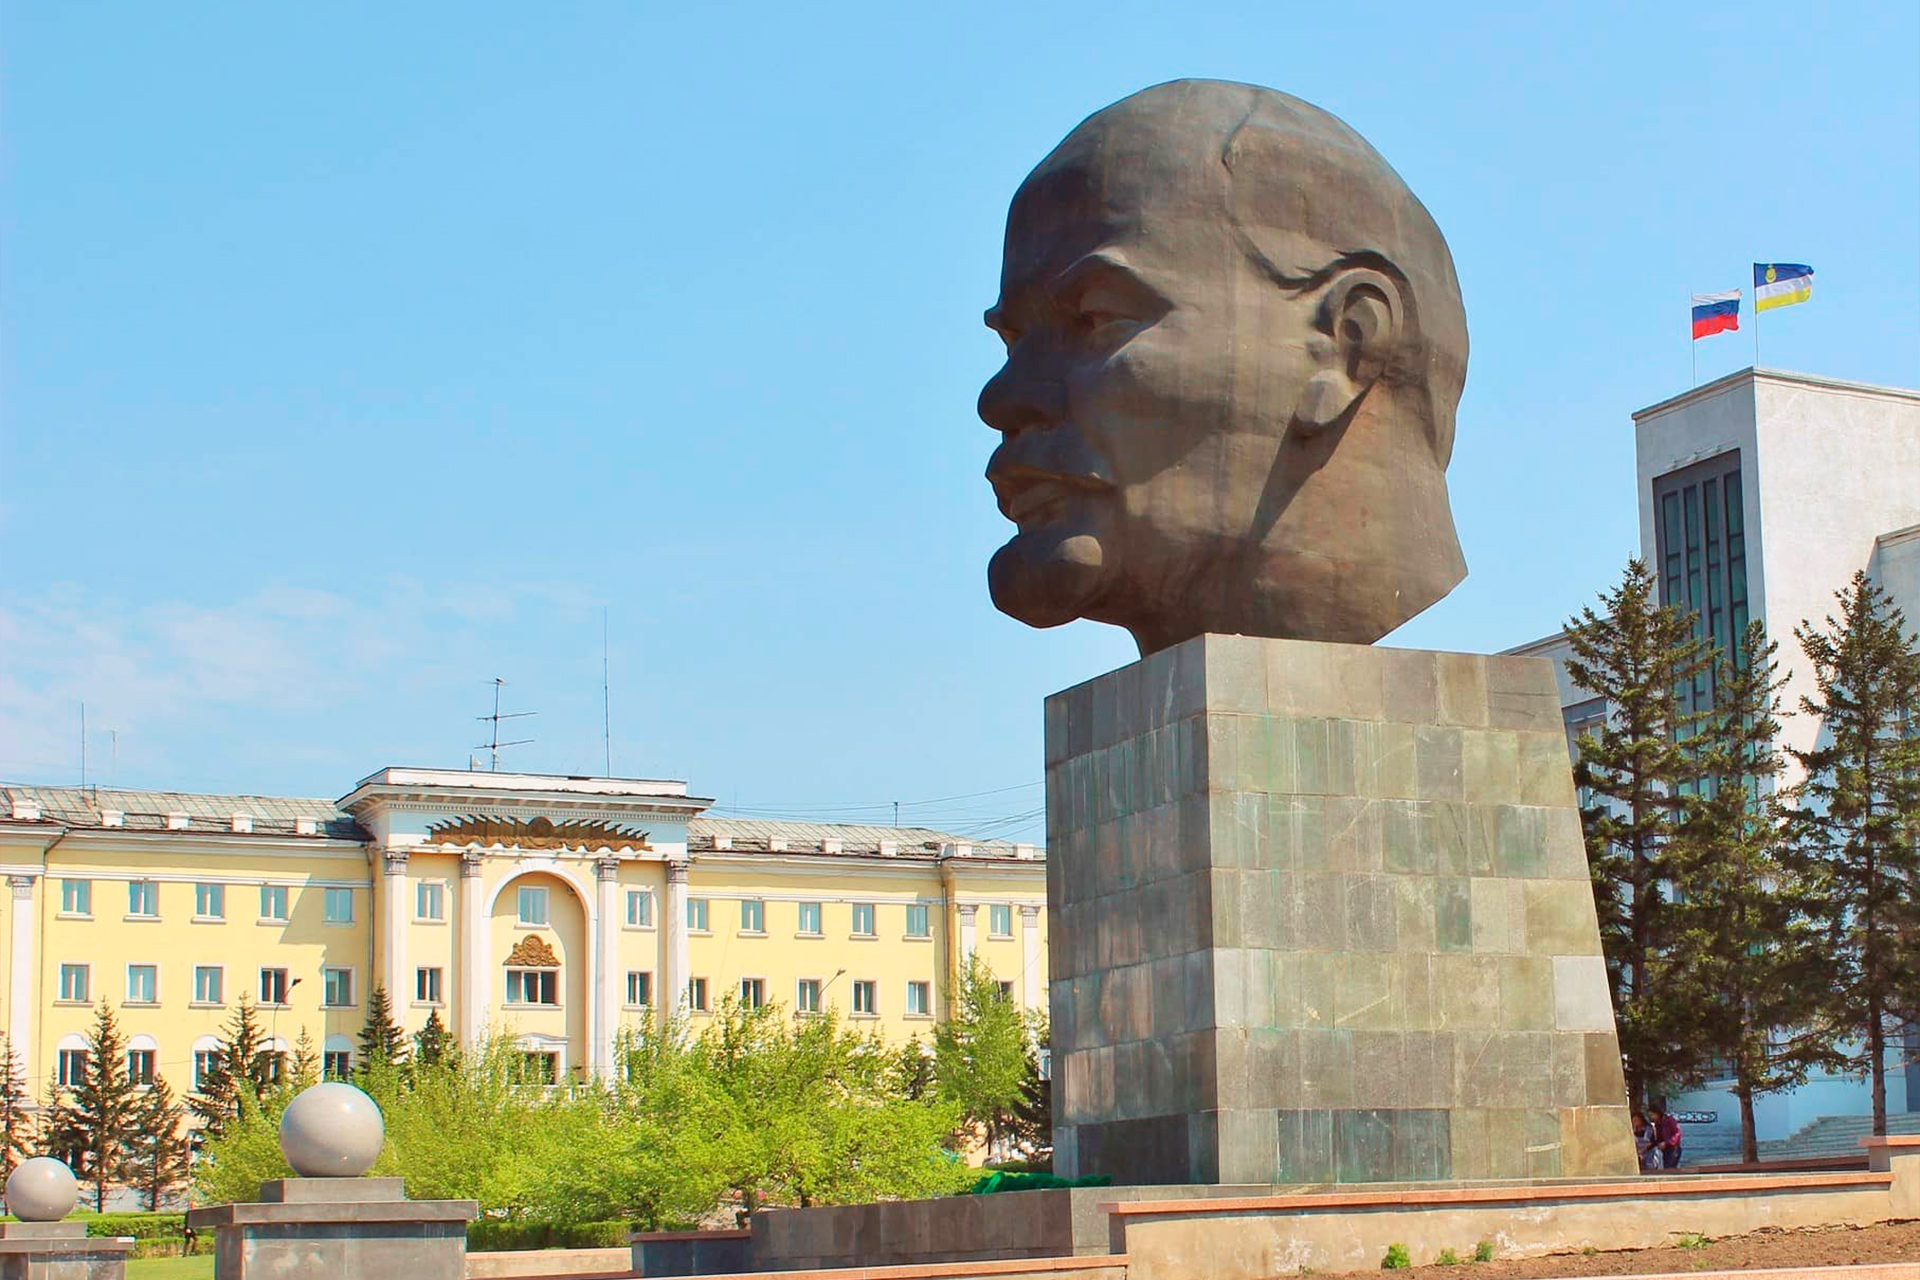 A grey pedestal with a giant head of a man on it. White and yellow buildings are in the background.